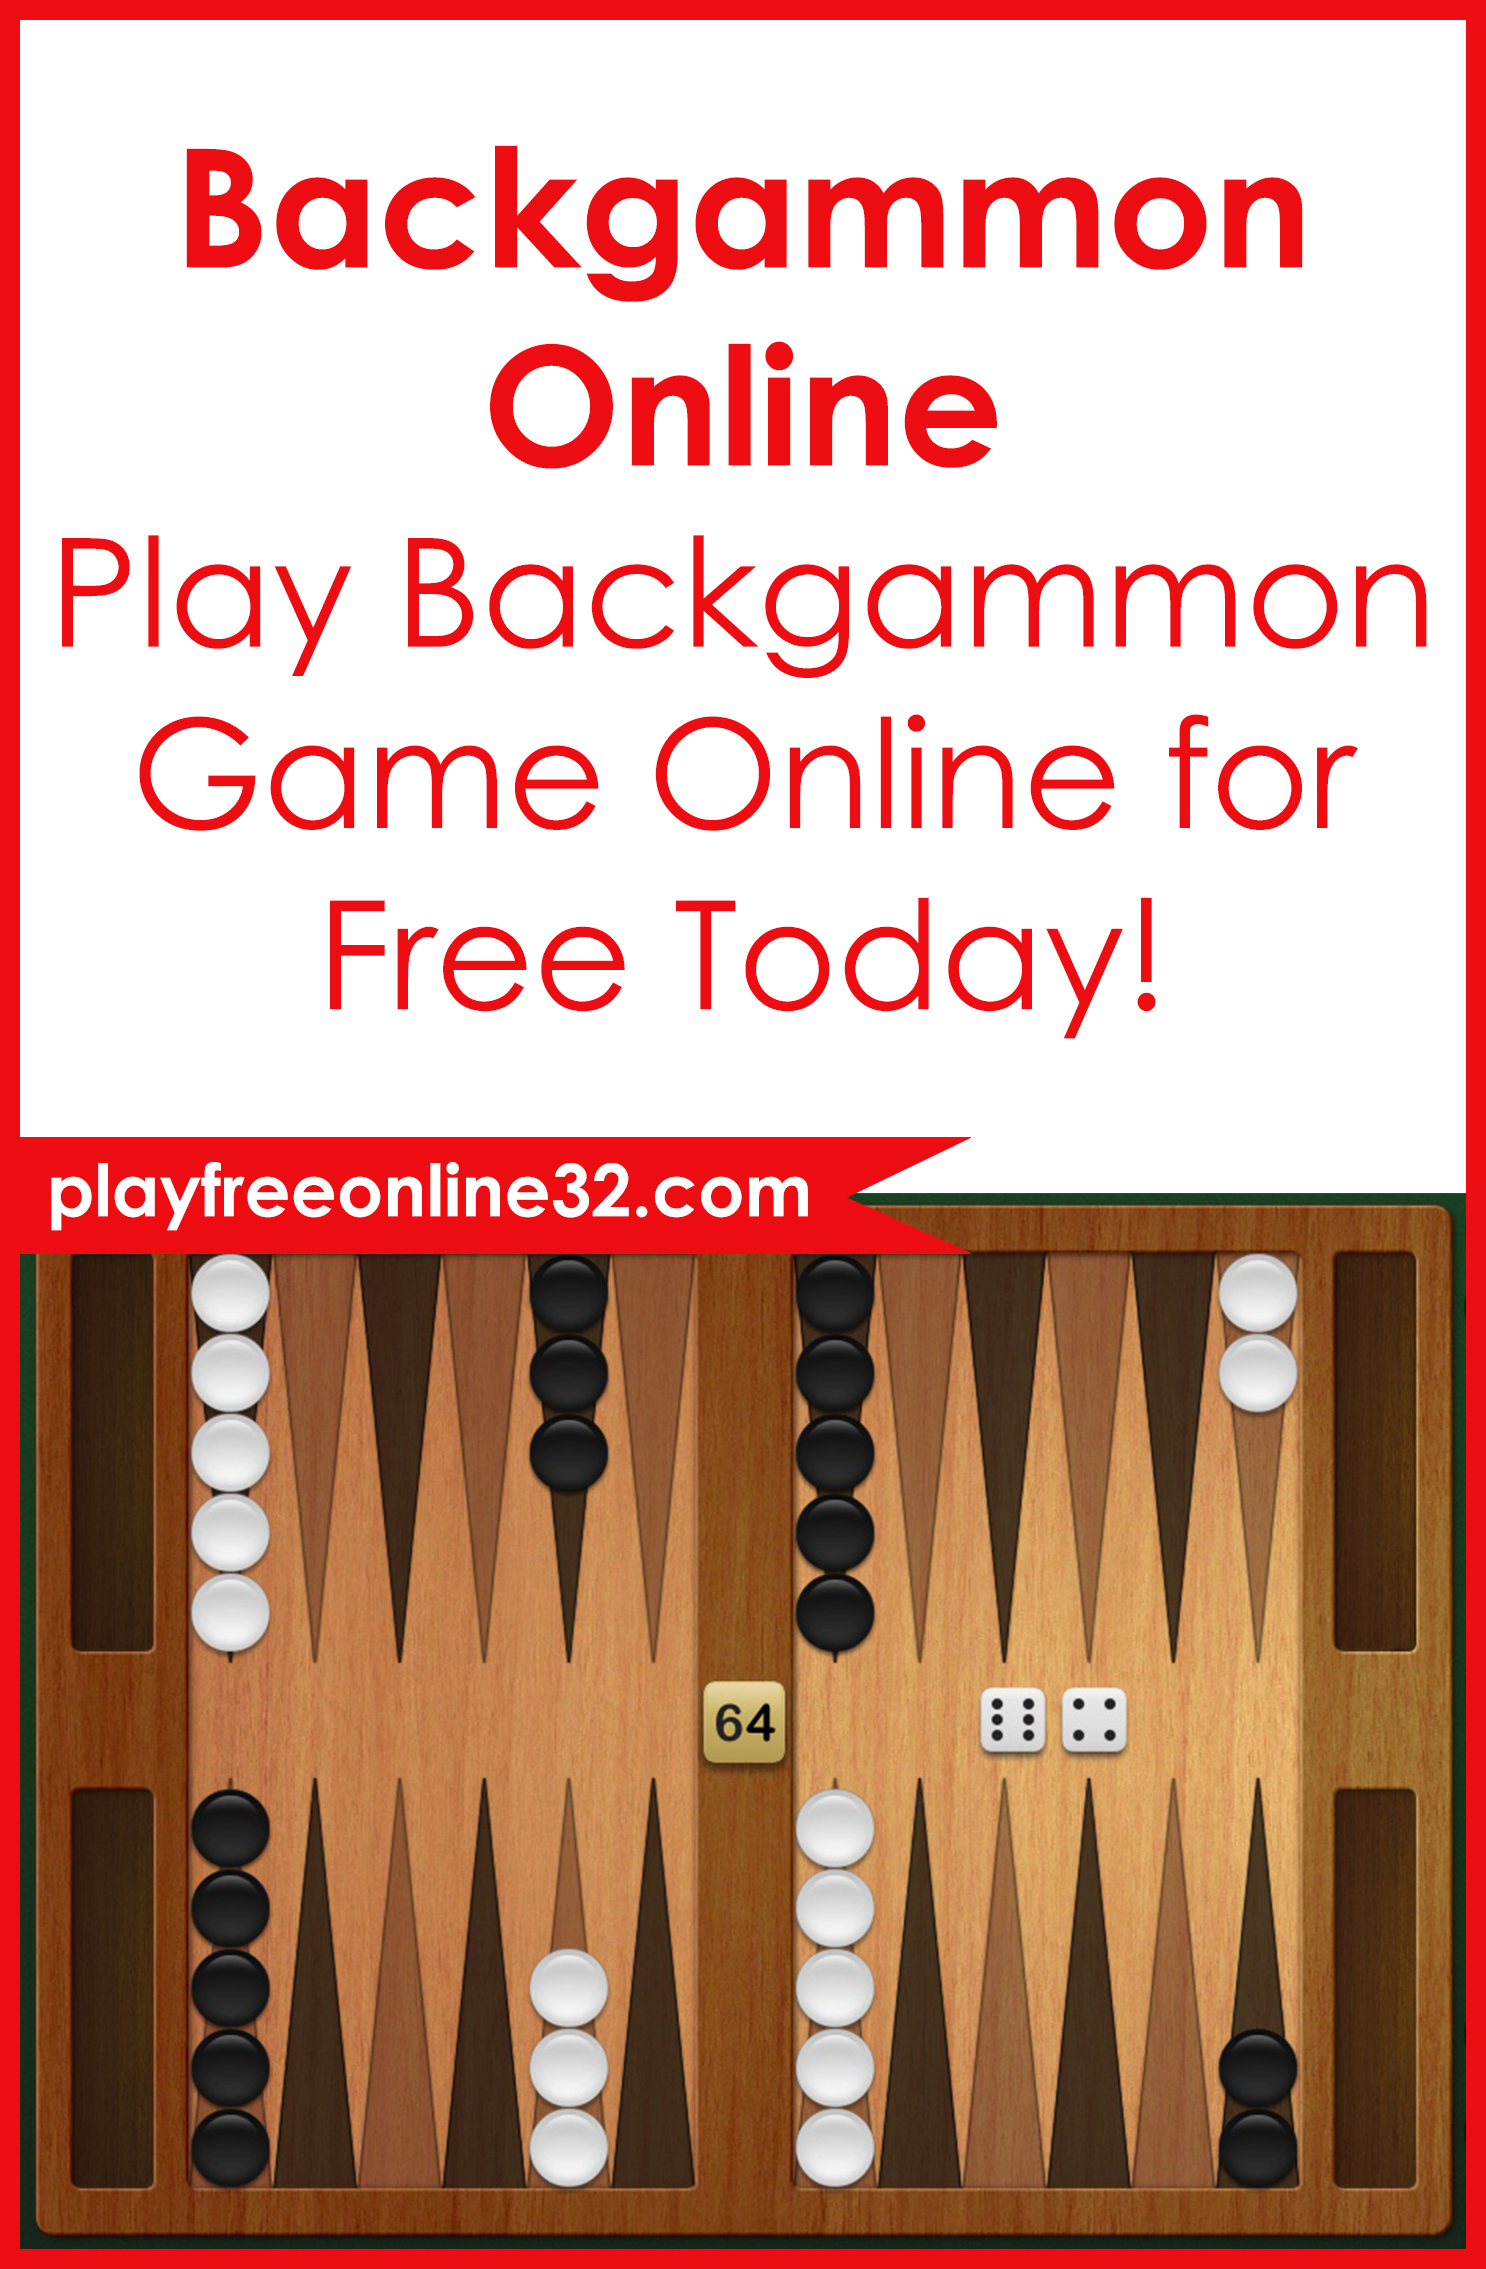 Backgammon Online • Play Backgammon Game Online for Free Today!